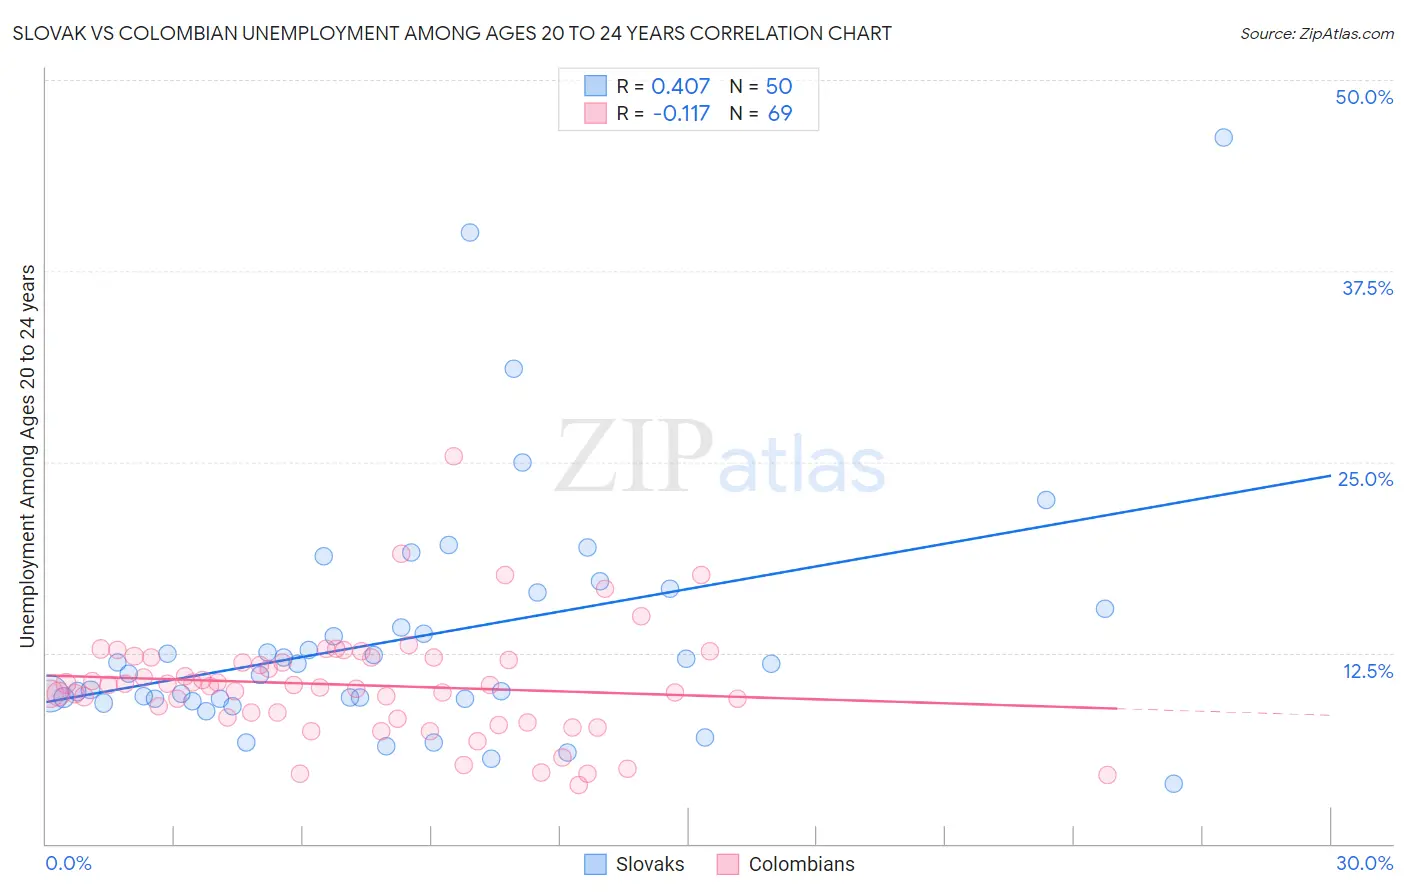 Slovak vs Colombian Unemployment Among Ages 20 to 24 years